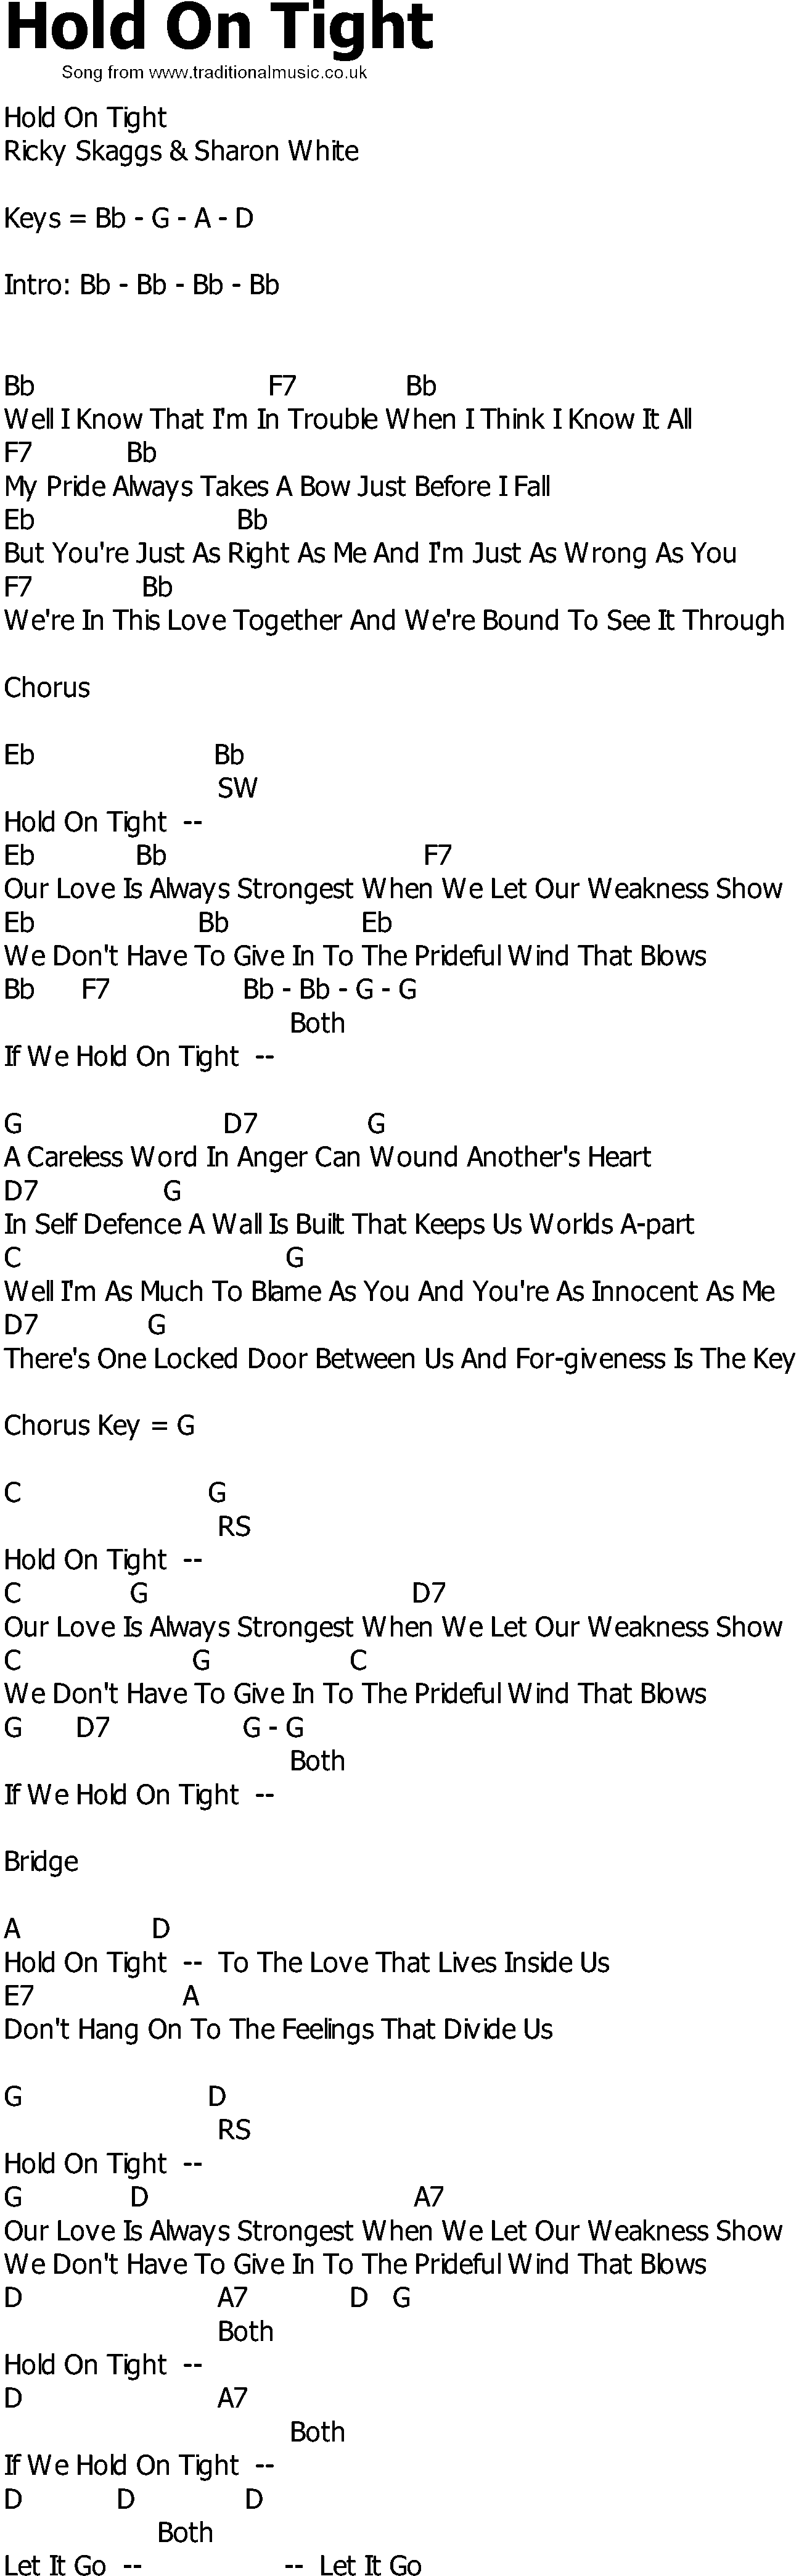 Old Country song lyrics with chords - Hold On Tight